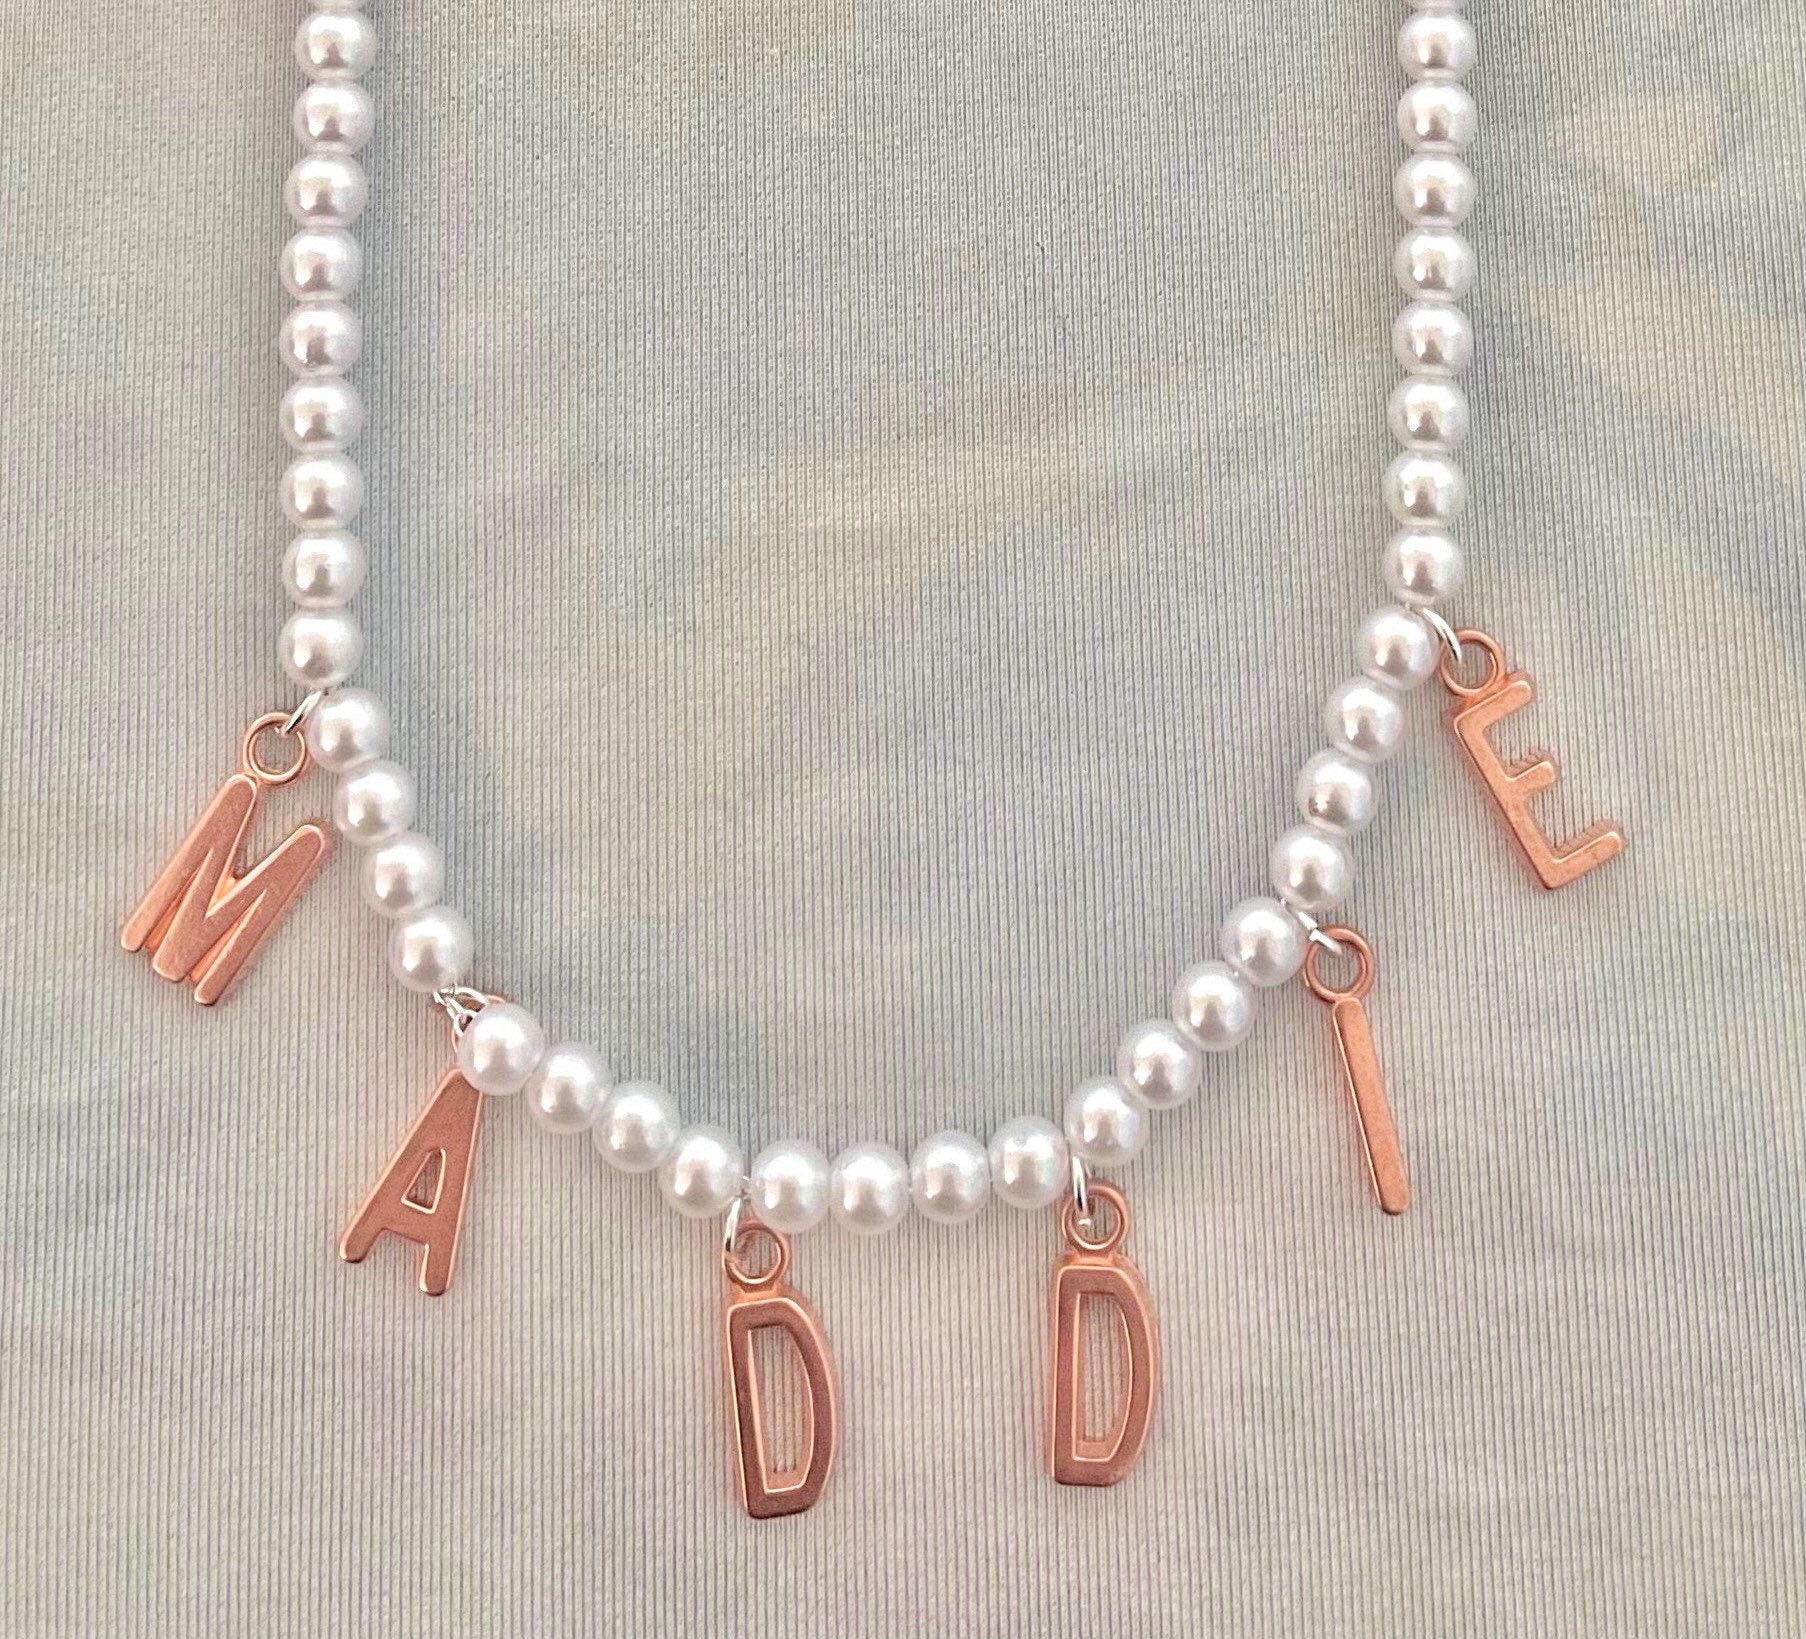 Personalised 5mm white pearl name necklace with rose gold | Etsy